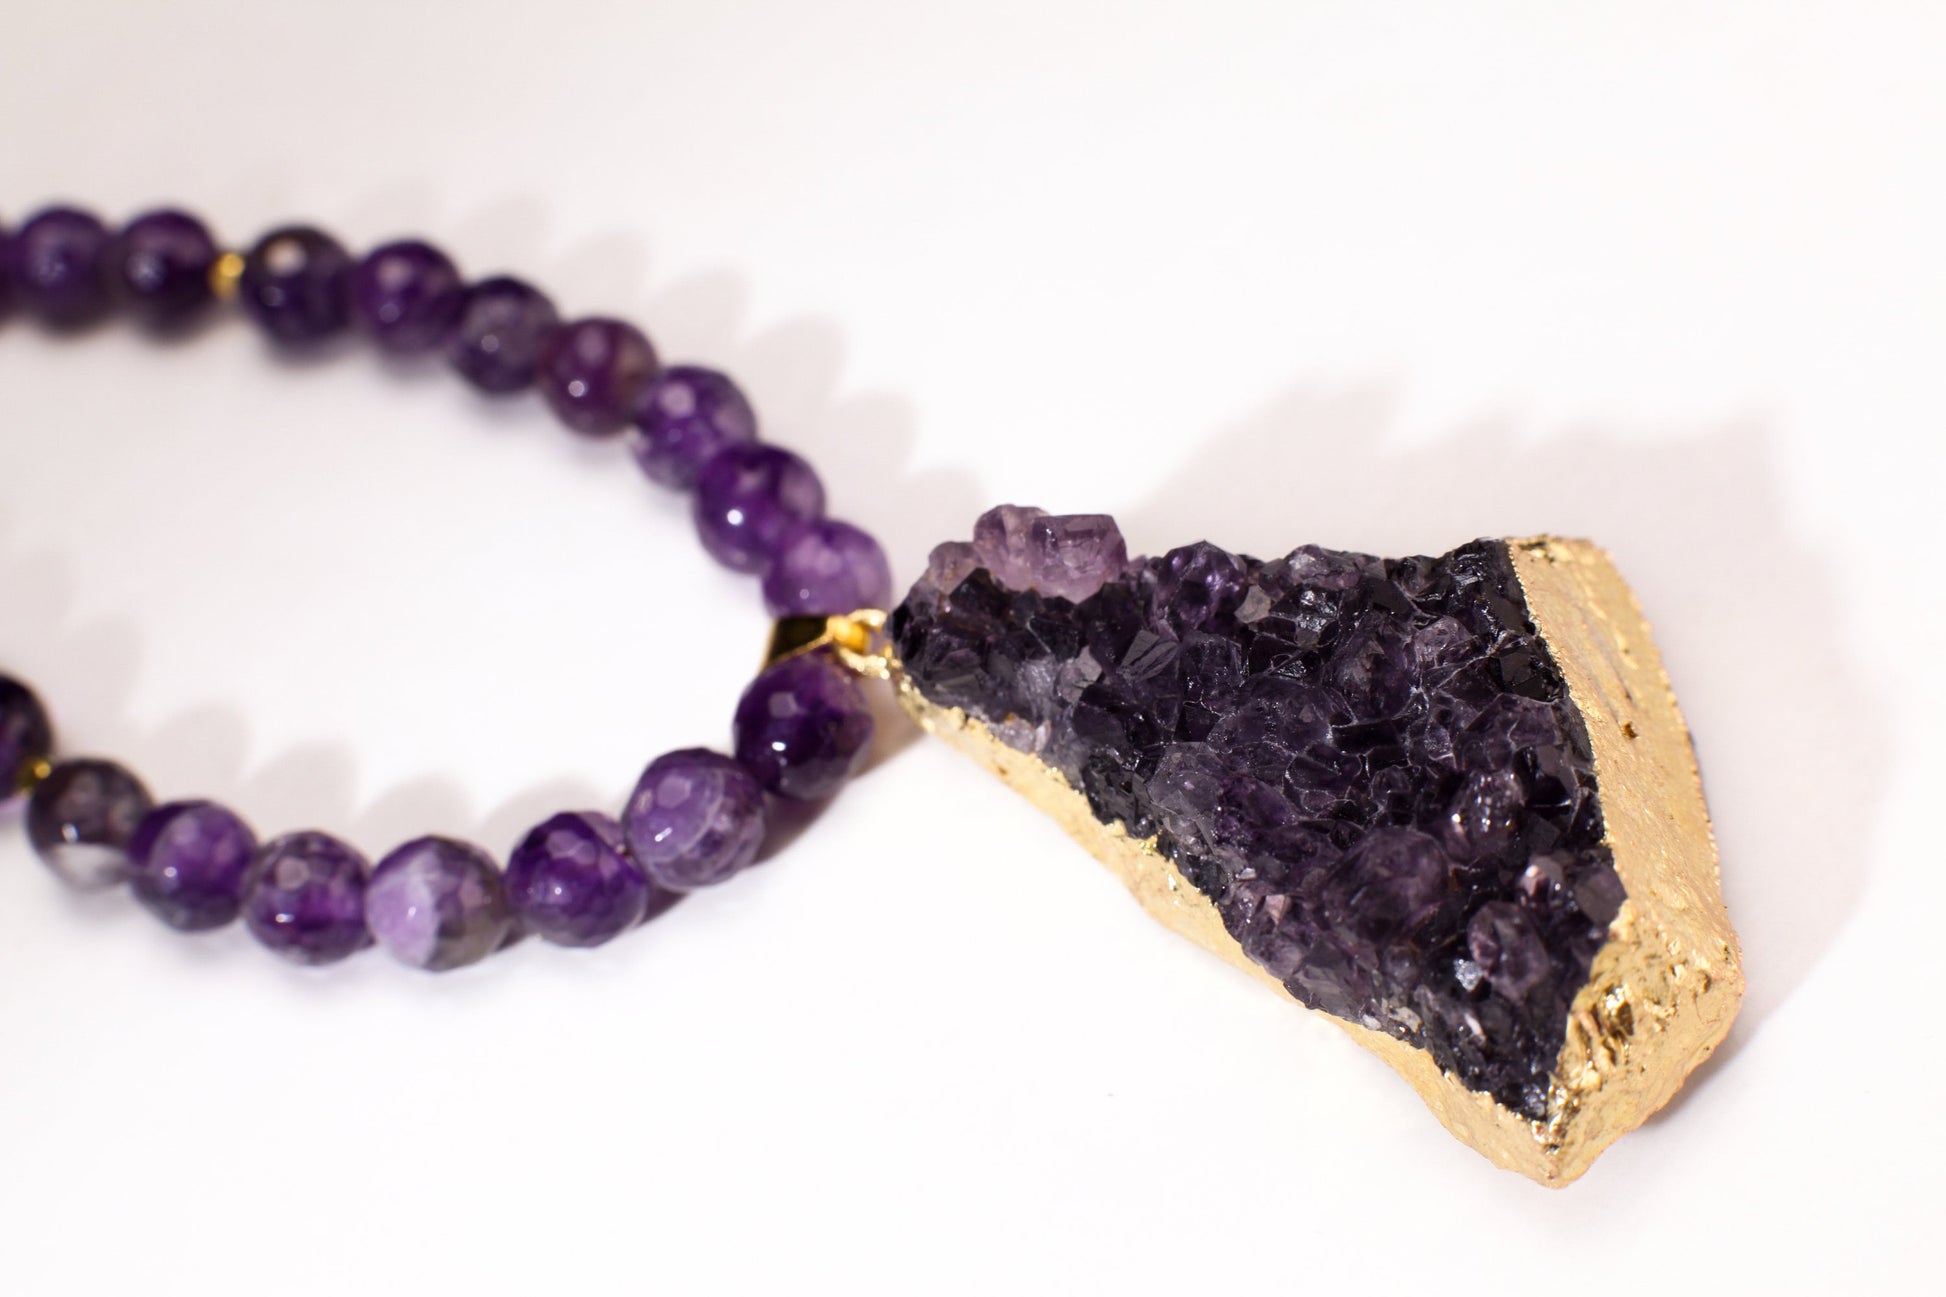 Amethyst Geode Raw Druzy Chunk 30x47mm long , 16mm thick Pendant, 8mm Natural Faceted Amethyst bead 18”gold Necklace 2" Extension Chain